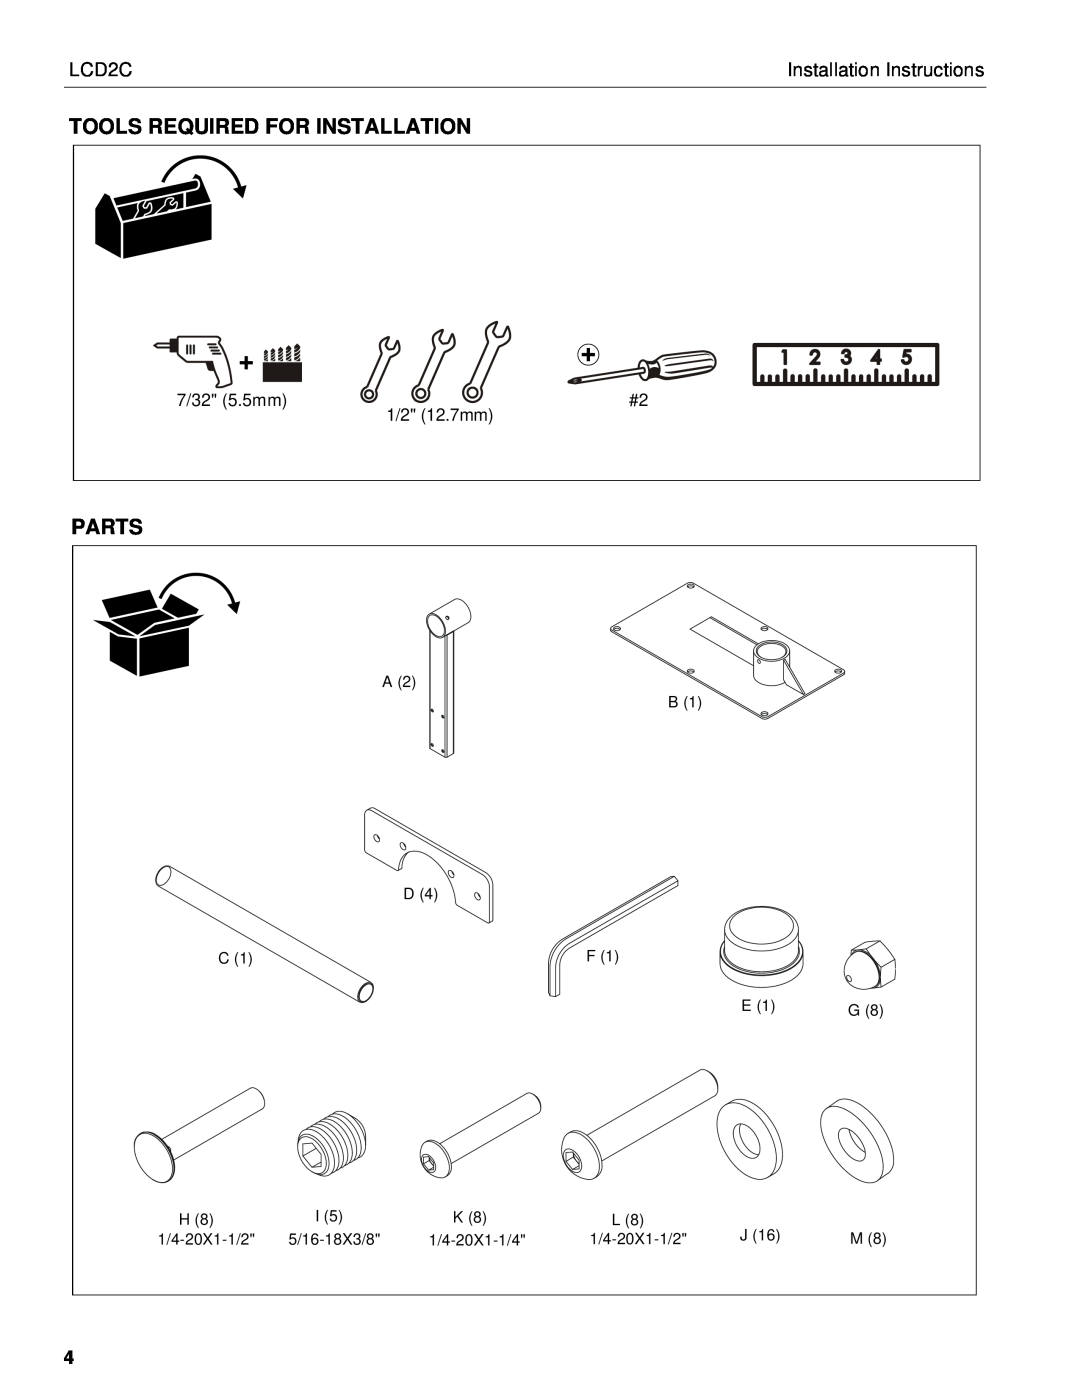 Chief Manufacturing LCD2C Tools Required For Installation, Parts, Installation Instructions, 7/32 5.5mm, 1/2 12.7mm 